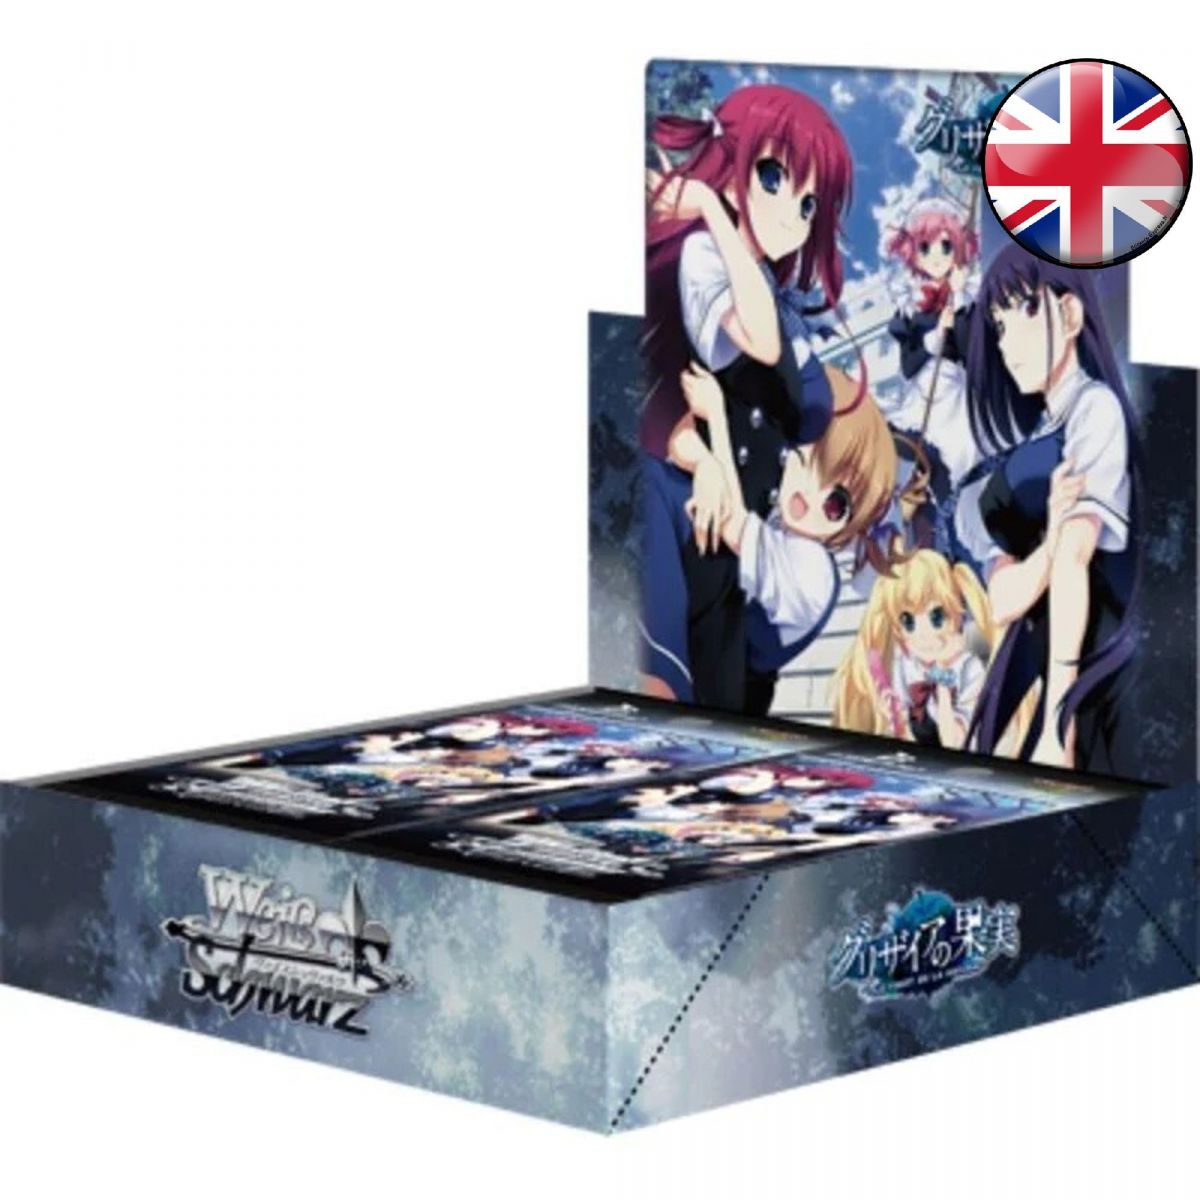 Weiss Schwarz - Display - Box of 16 Boosters - The Fruit Of Grisaia - EN